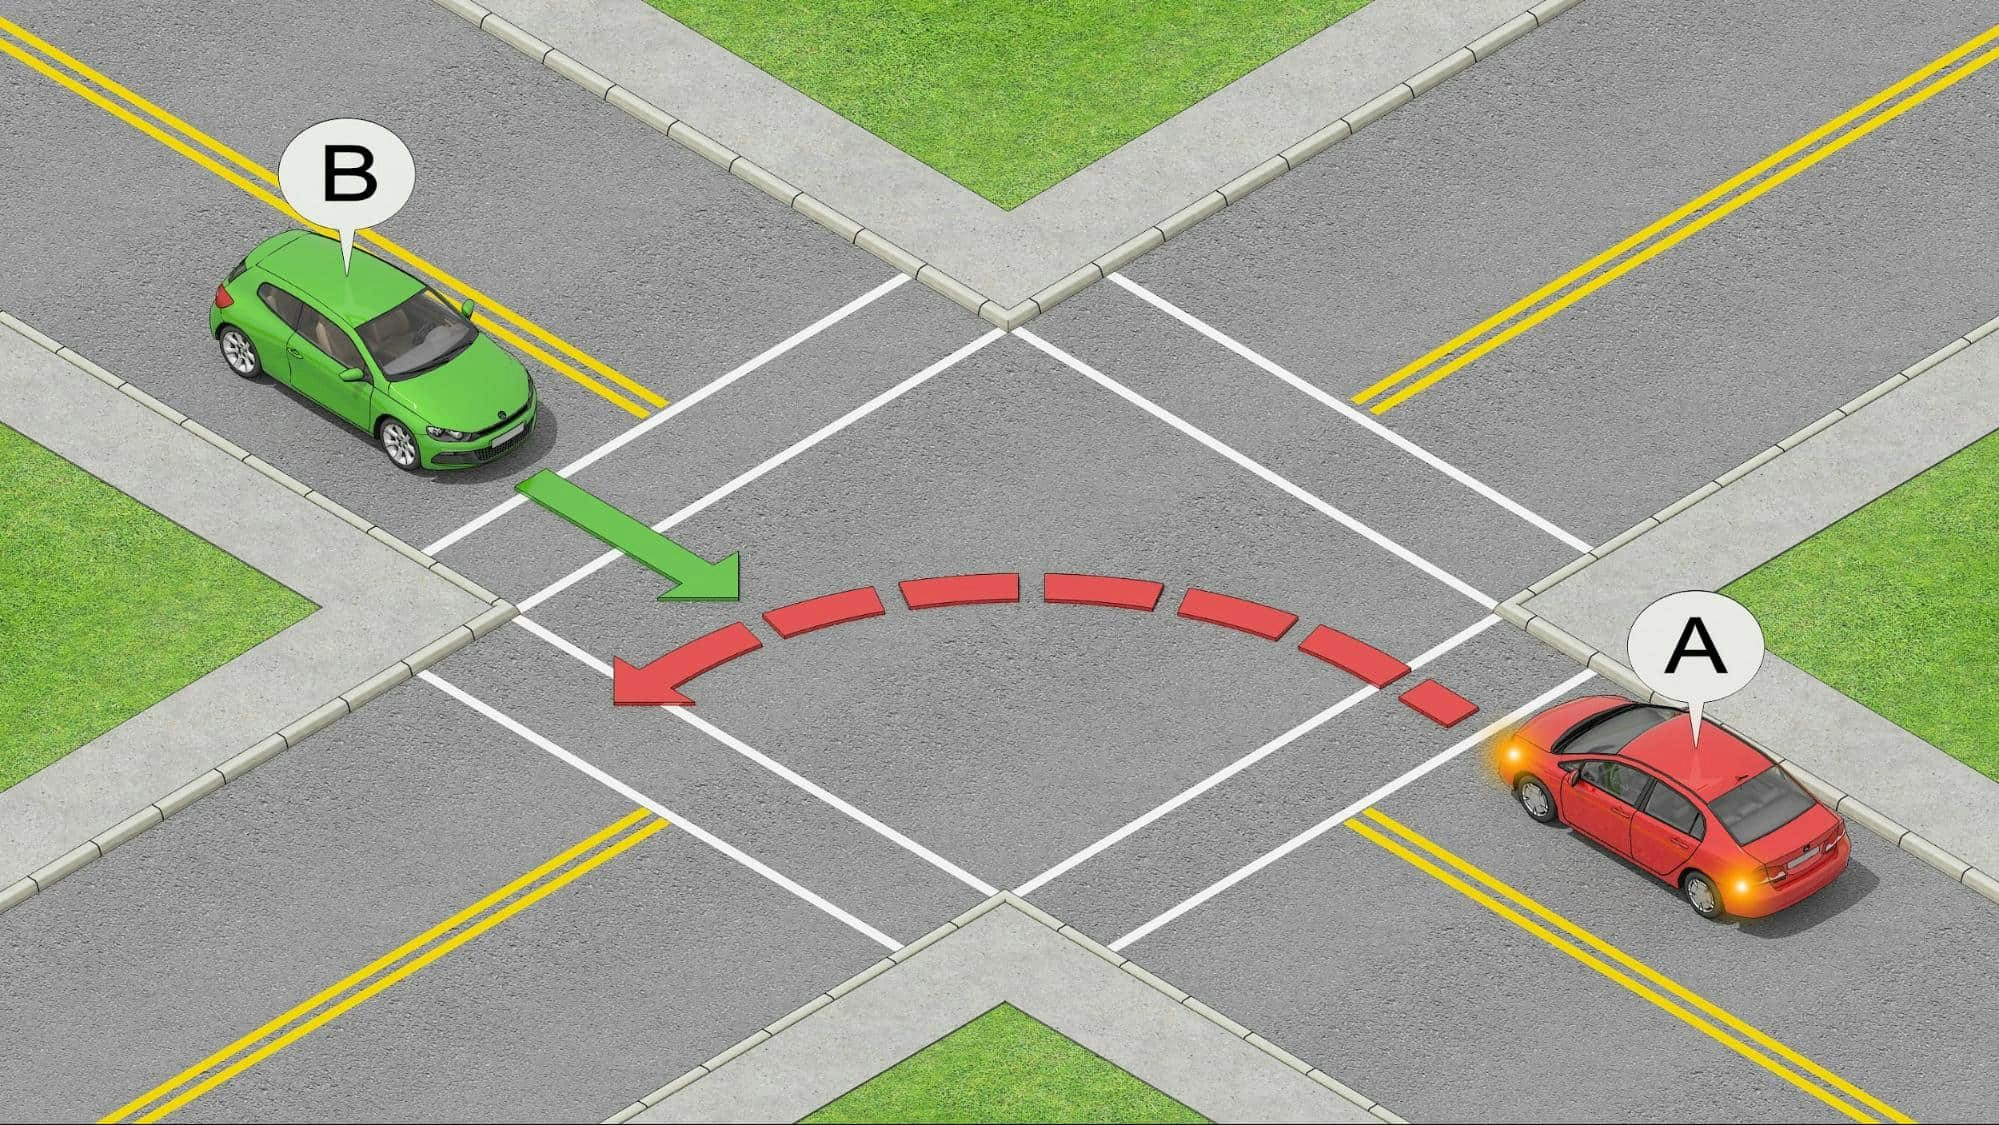 yield when turning left